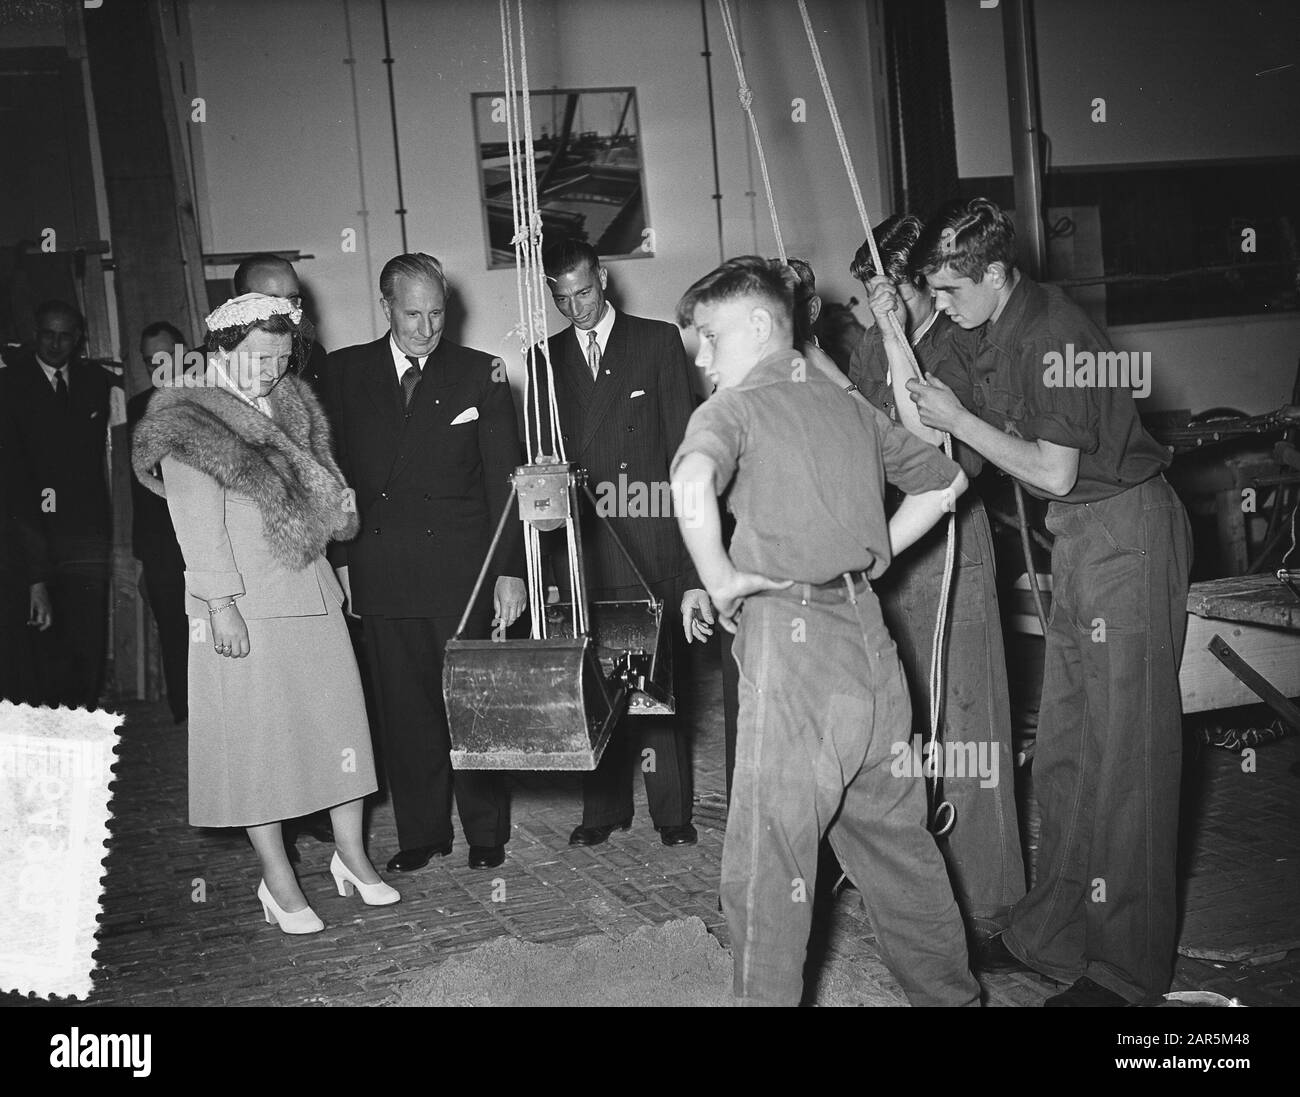 Queen Juliana visits the Havenvakschool (N.V. Thomsens) in Rotterdam Date: 31 May 1954 Location: Rotterdam, Zuid-Holland Keywords: queen Personname: Juliana, Queen Institution name : NV Thomsens Stock Photo